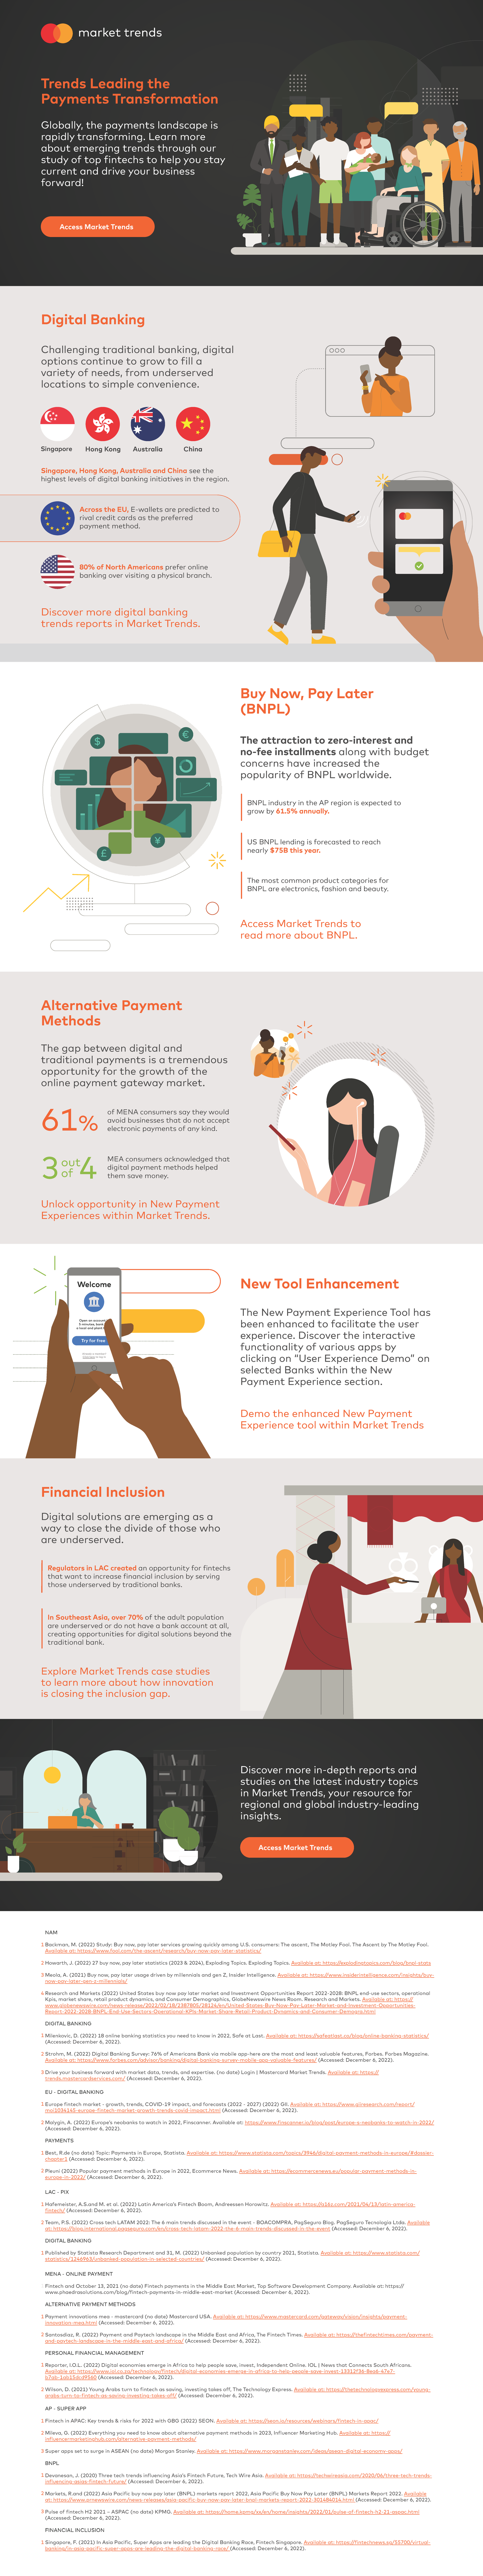 Digital First Youth Banking Trends